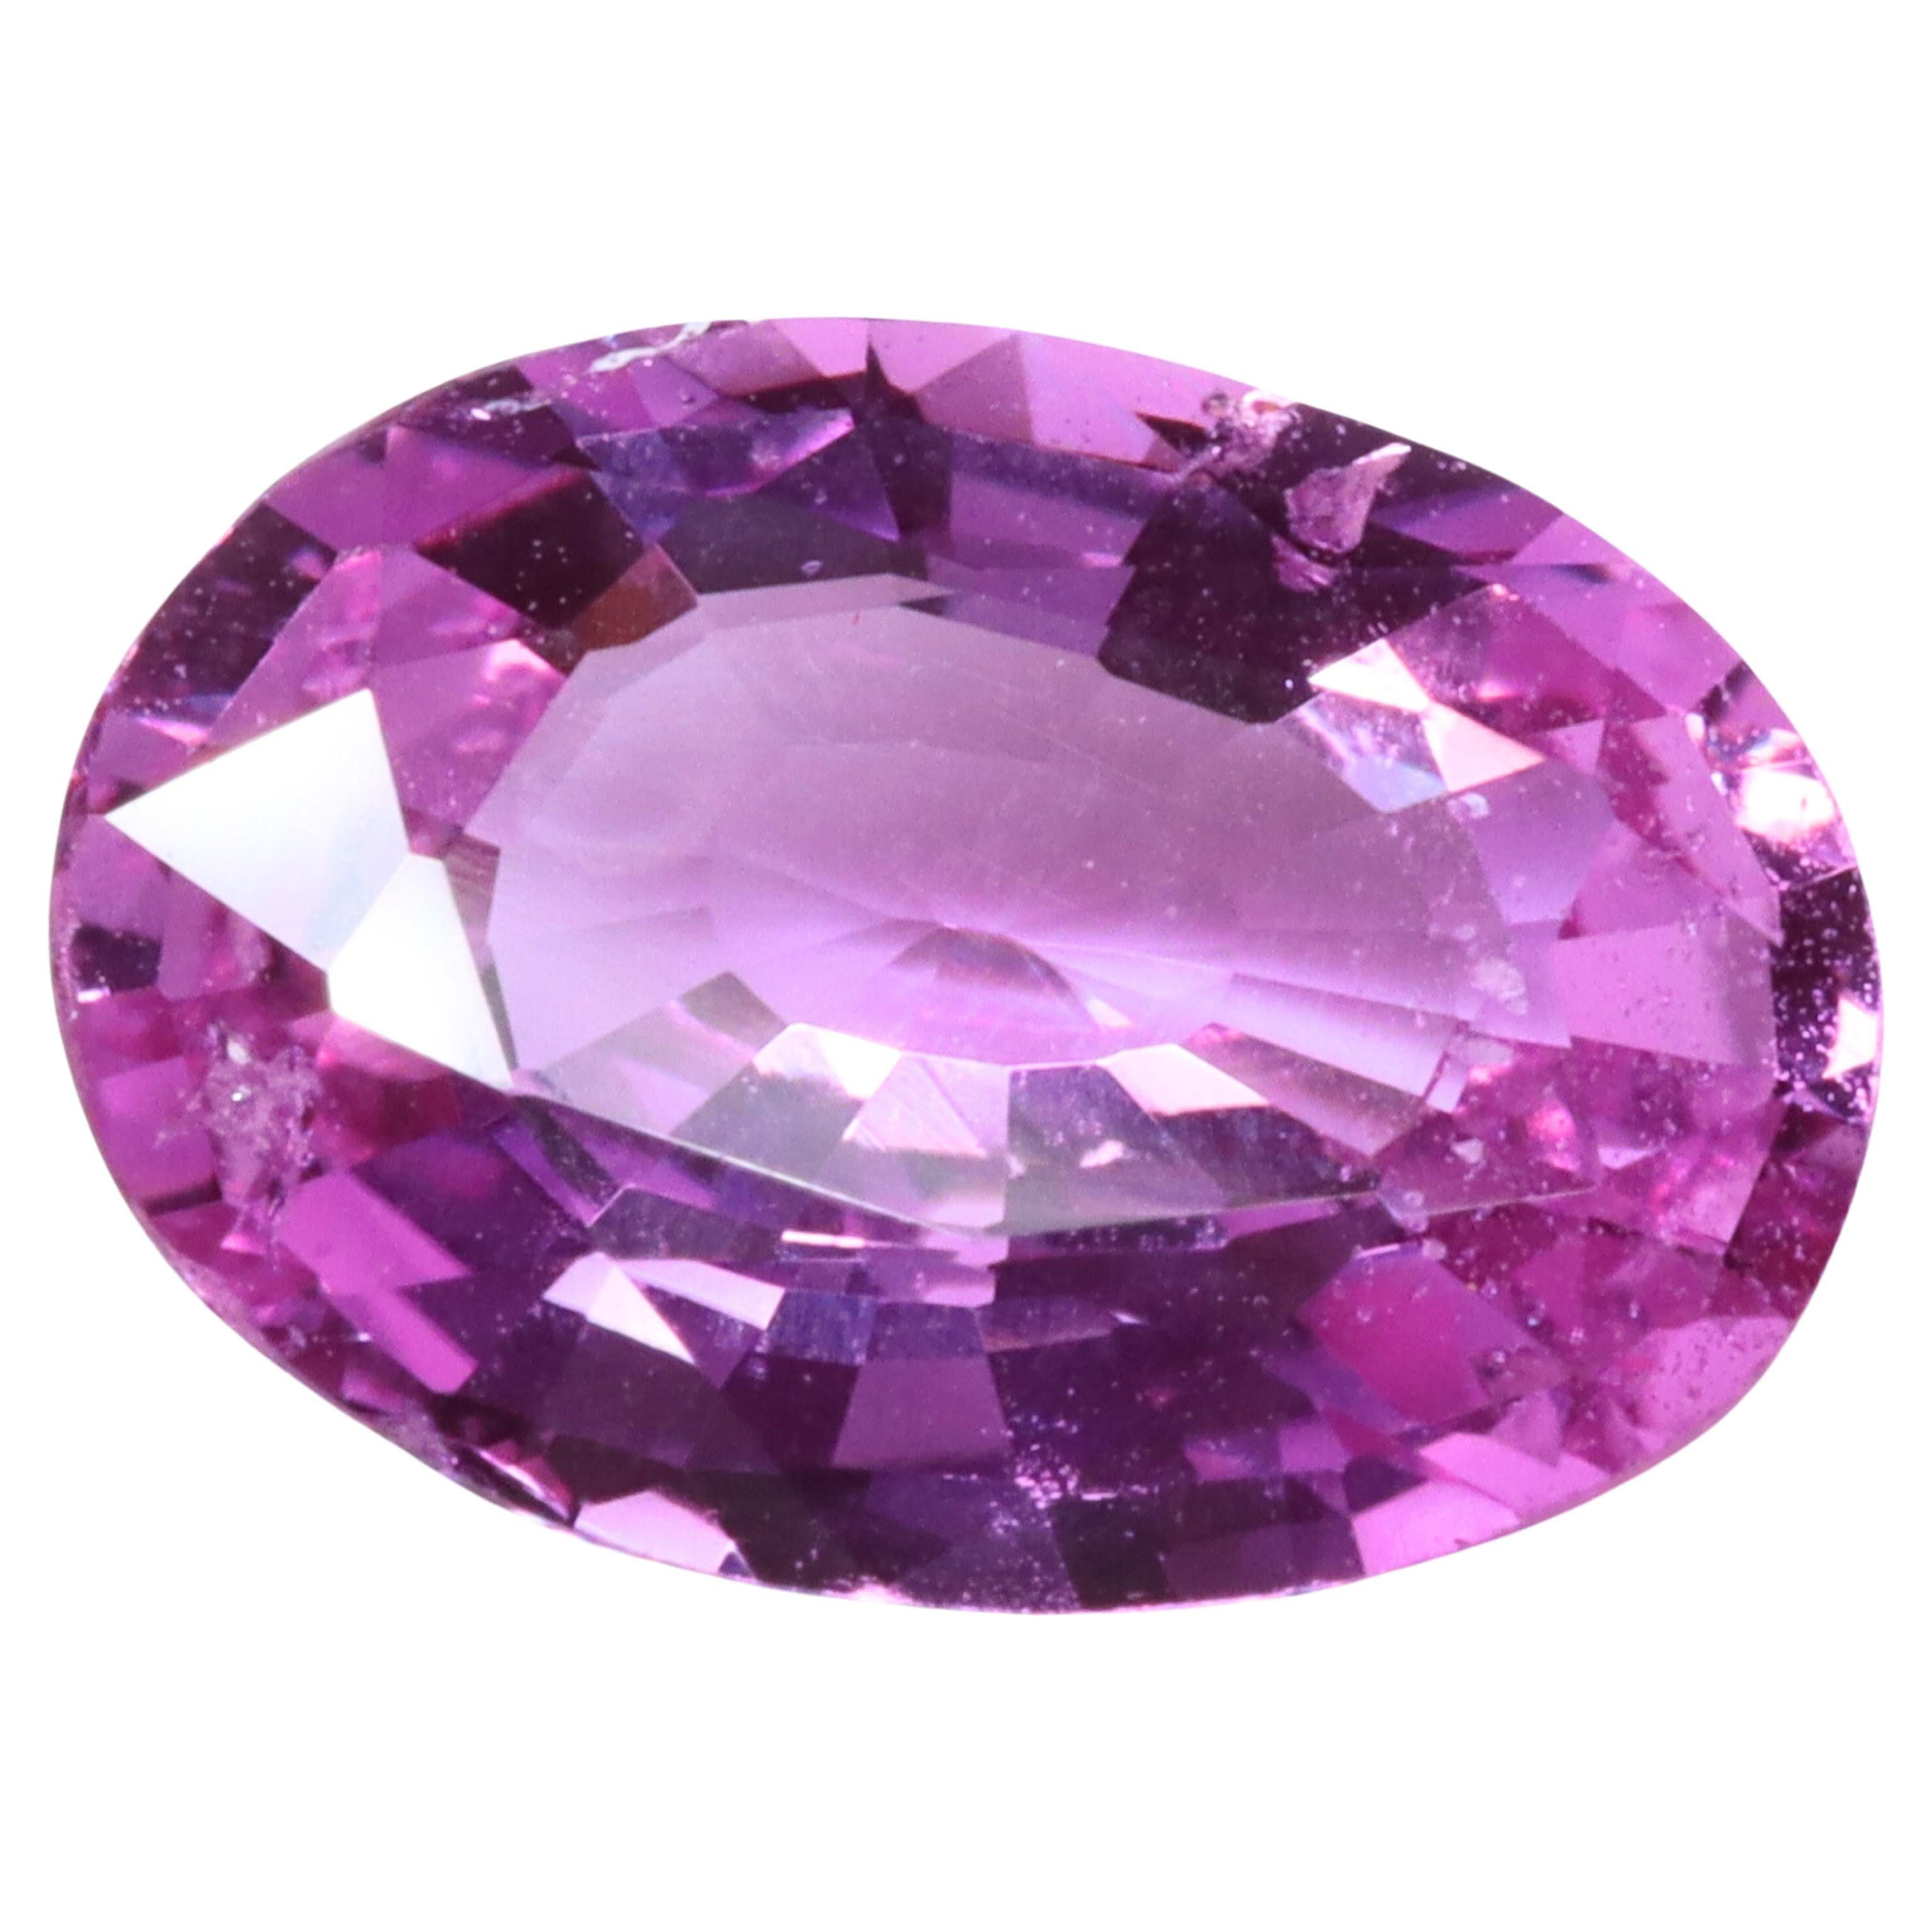 Certified Unheated Vivid Pink Sapphire 1.55ct For Sale